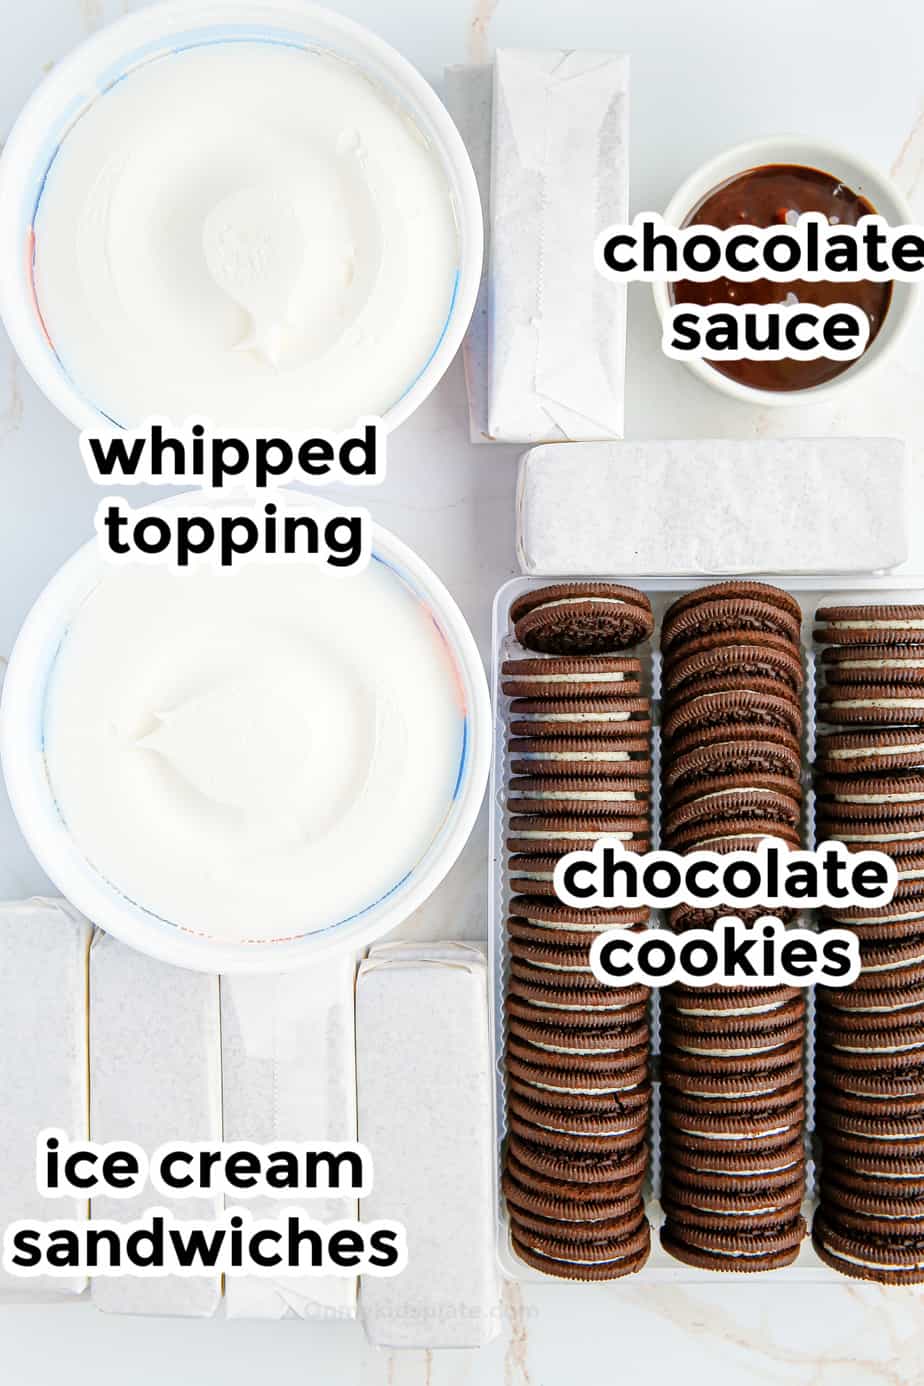 Ingredients for cookies and cream ice cream cake on a table from overhead with labels.